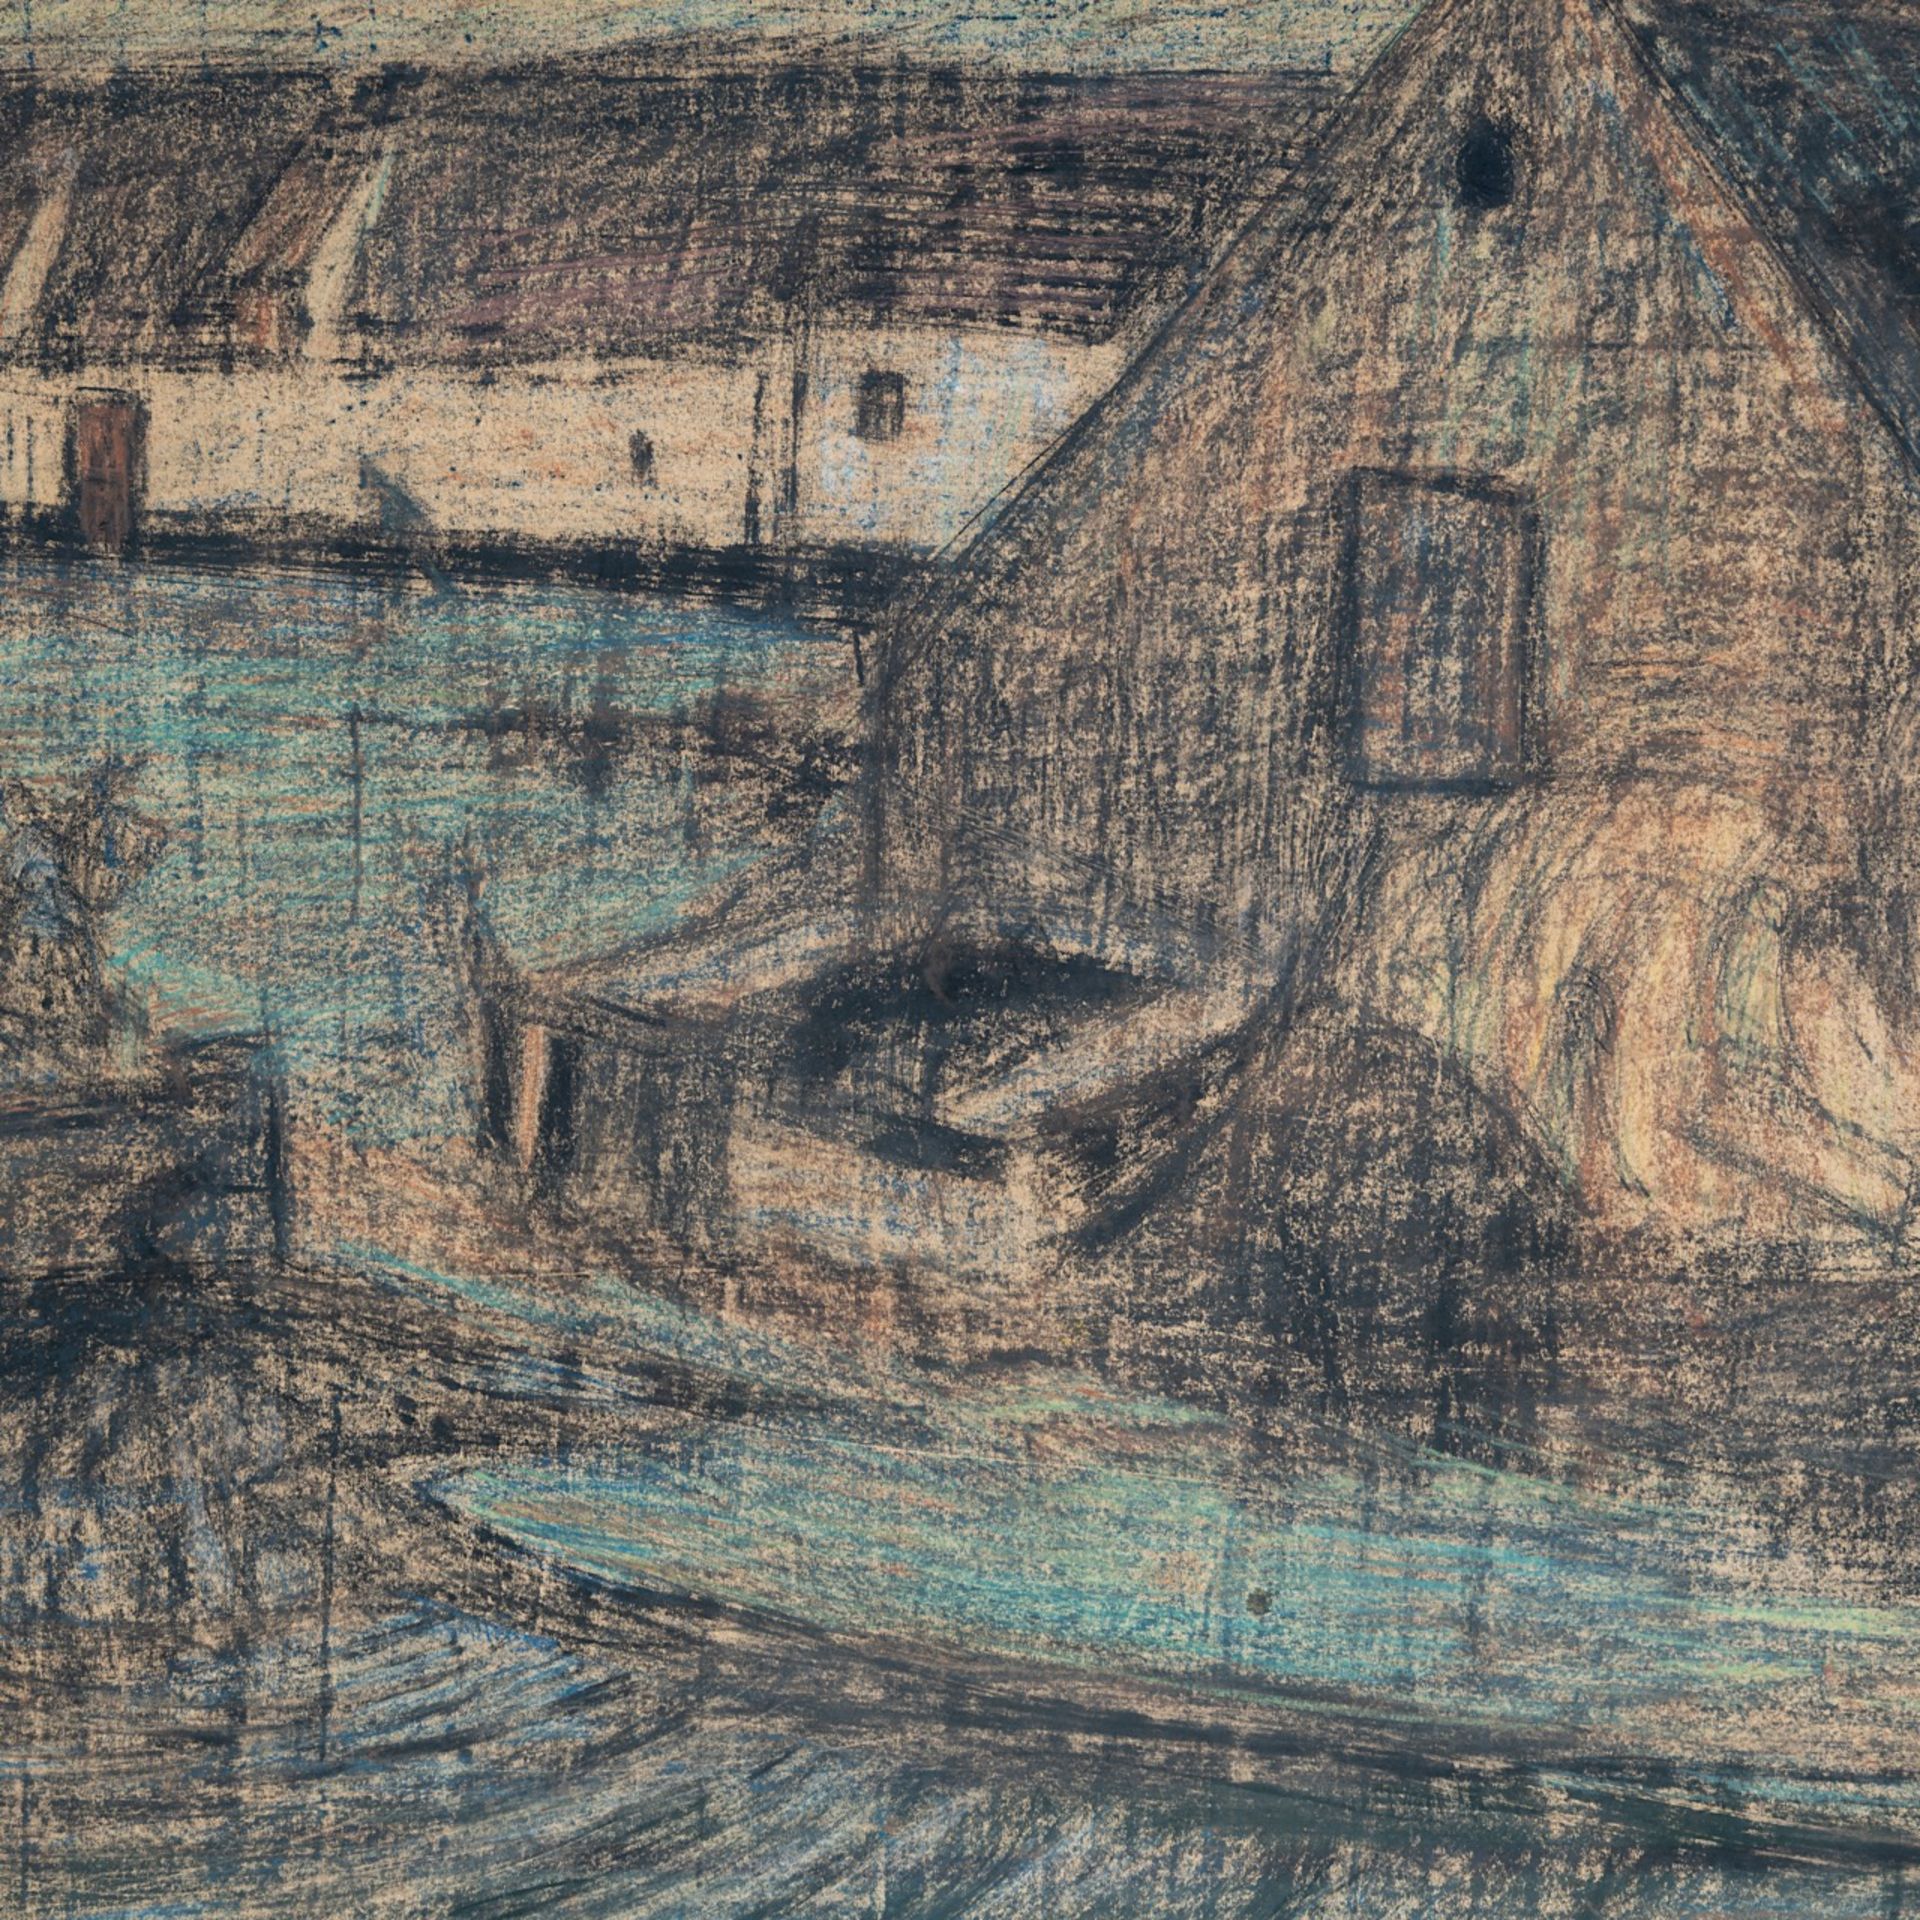 Constant Permeke (1886-1952), the farm, 1913, pastel and charcoal on paper 65 x 75 cm. (25.5 x 29.5 - Image 5 of 6